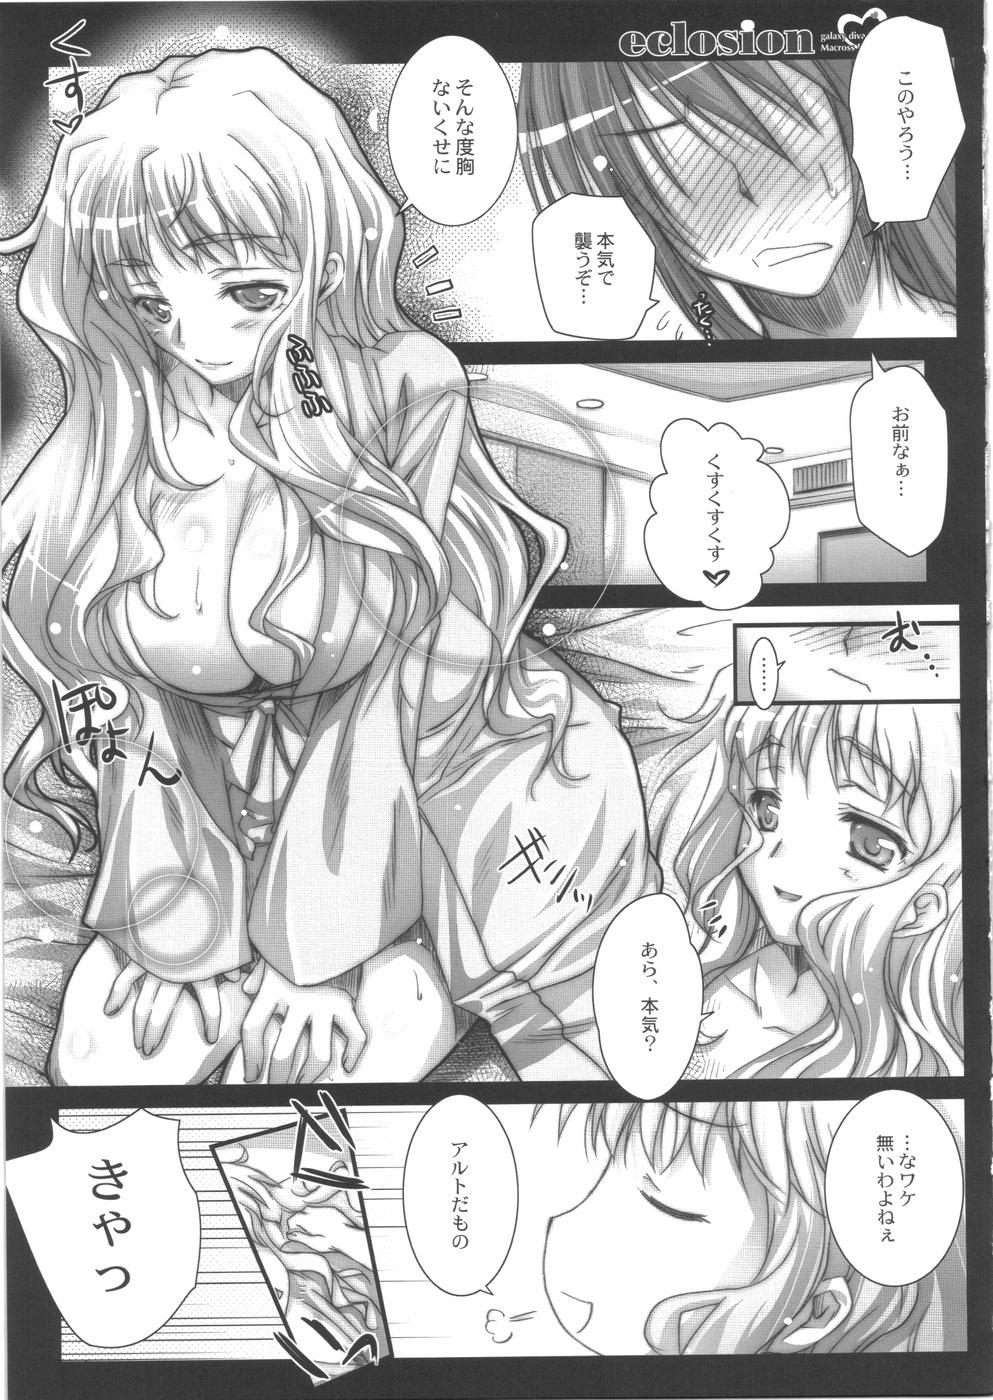 Old Man eclosion - Macross frontier Fun - Page 9